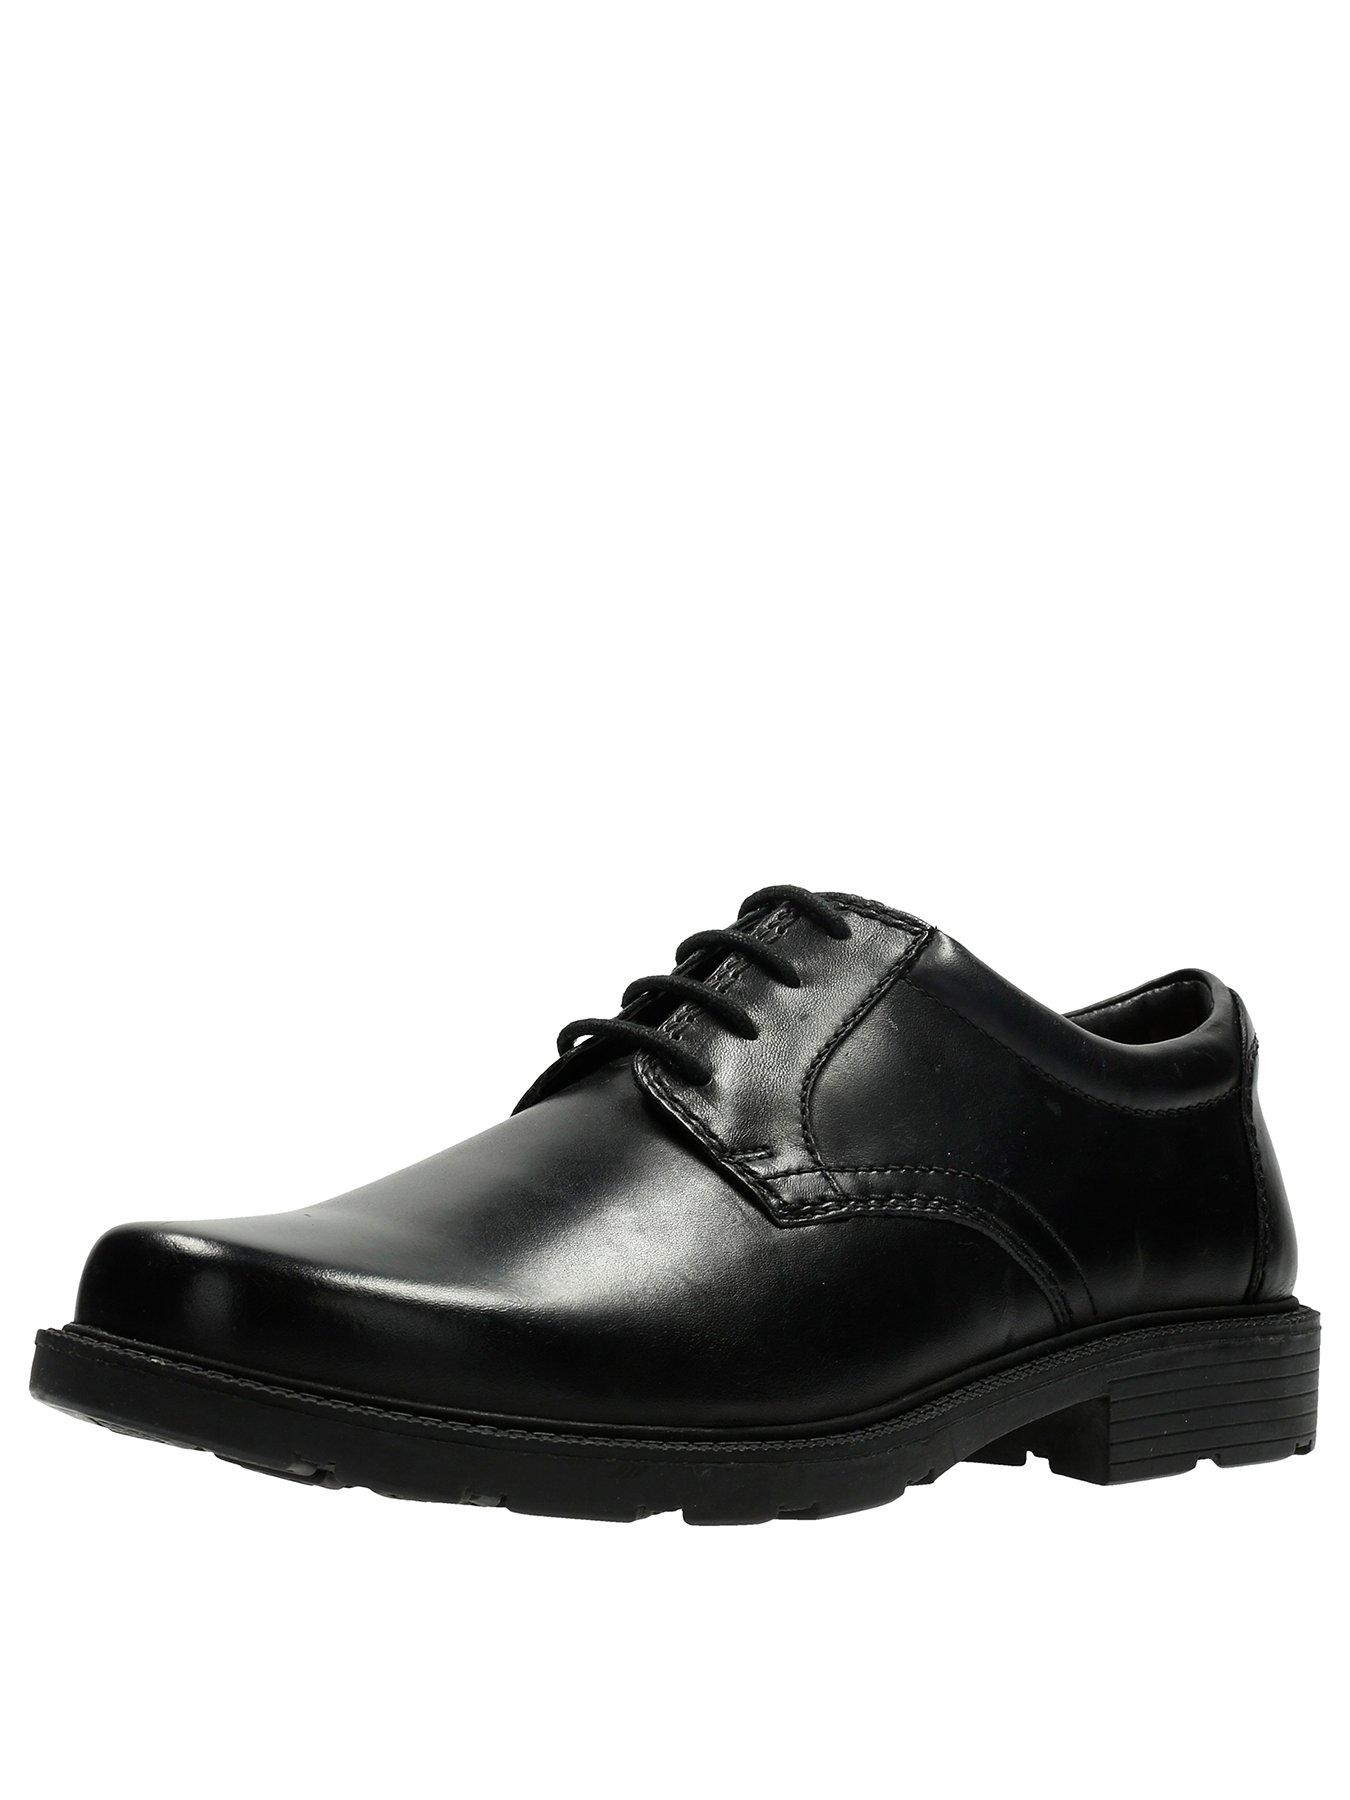 Clarks Lair Watch Shoes - Black | very 